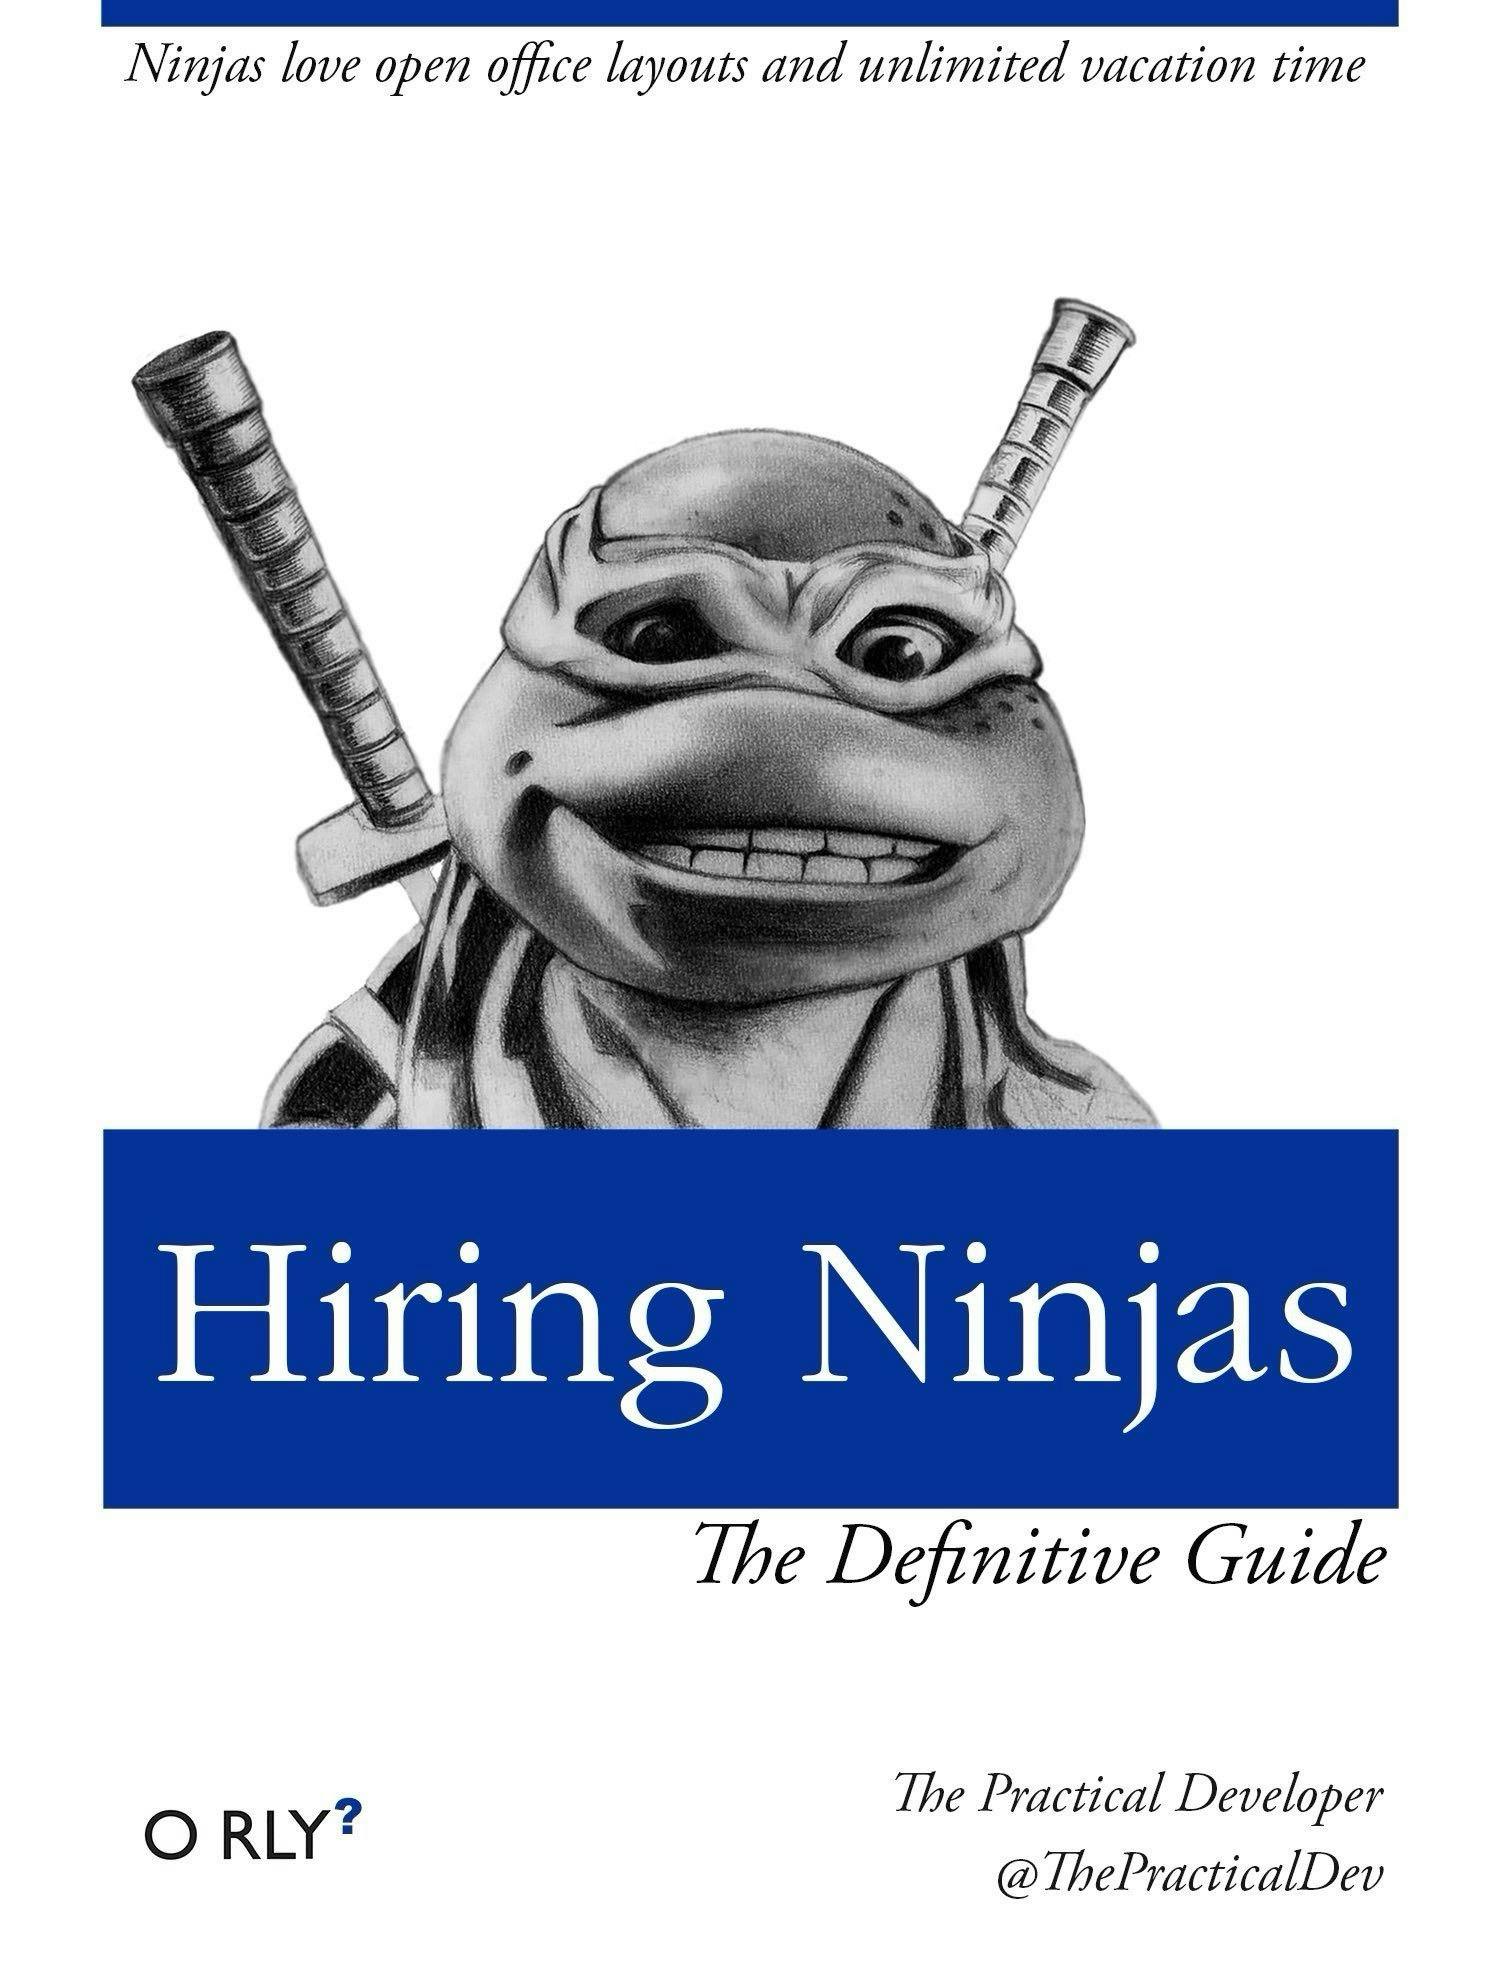 Hiring Ninjas | Ninjas love open office layouts and unlimited vacation time